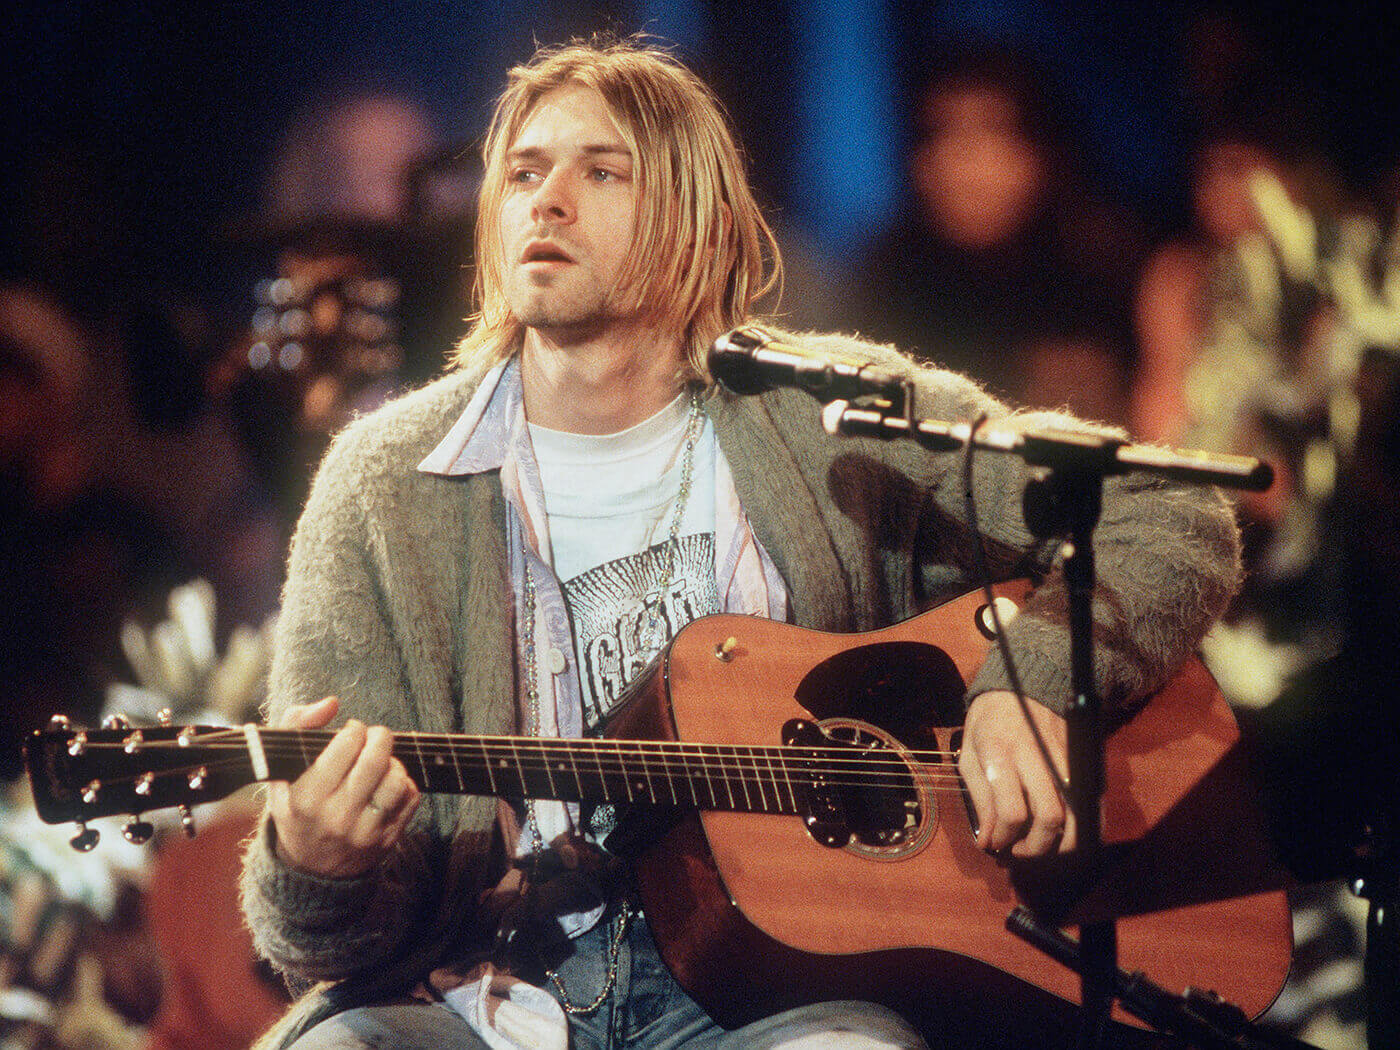 Kurt Cobain during the taping of MTV Unplugged in 1993, photo by Frank Micelotta Archive/Getty Images